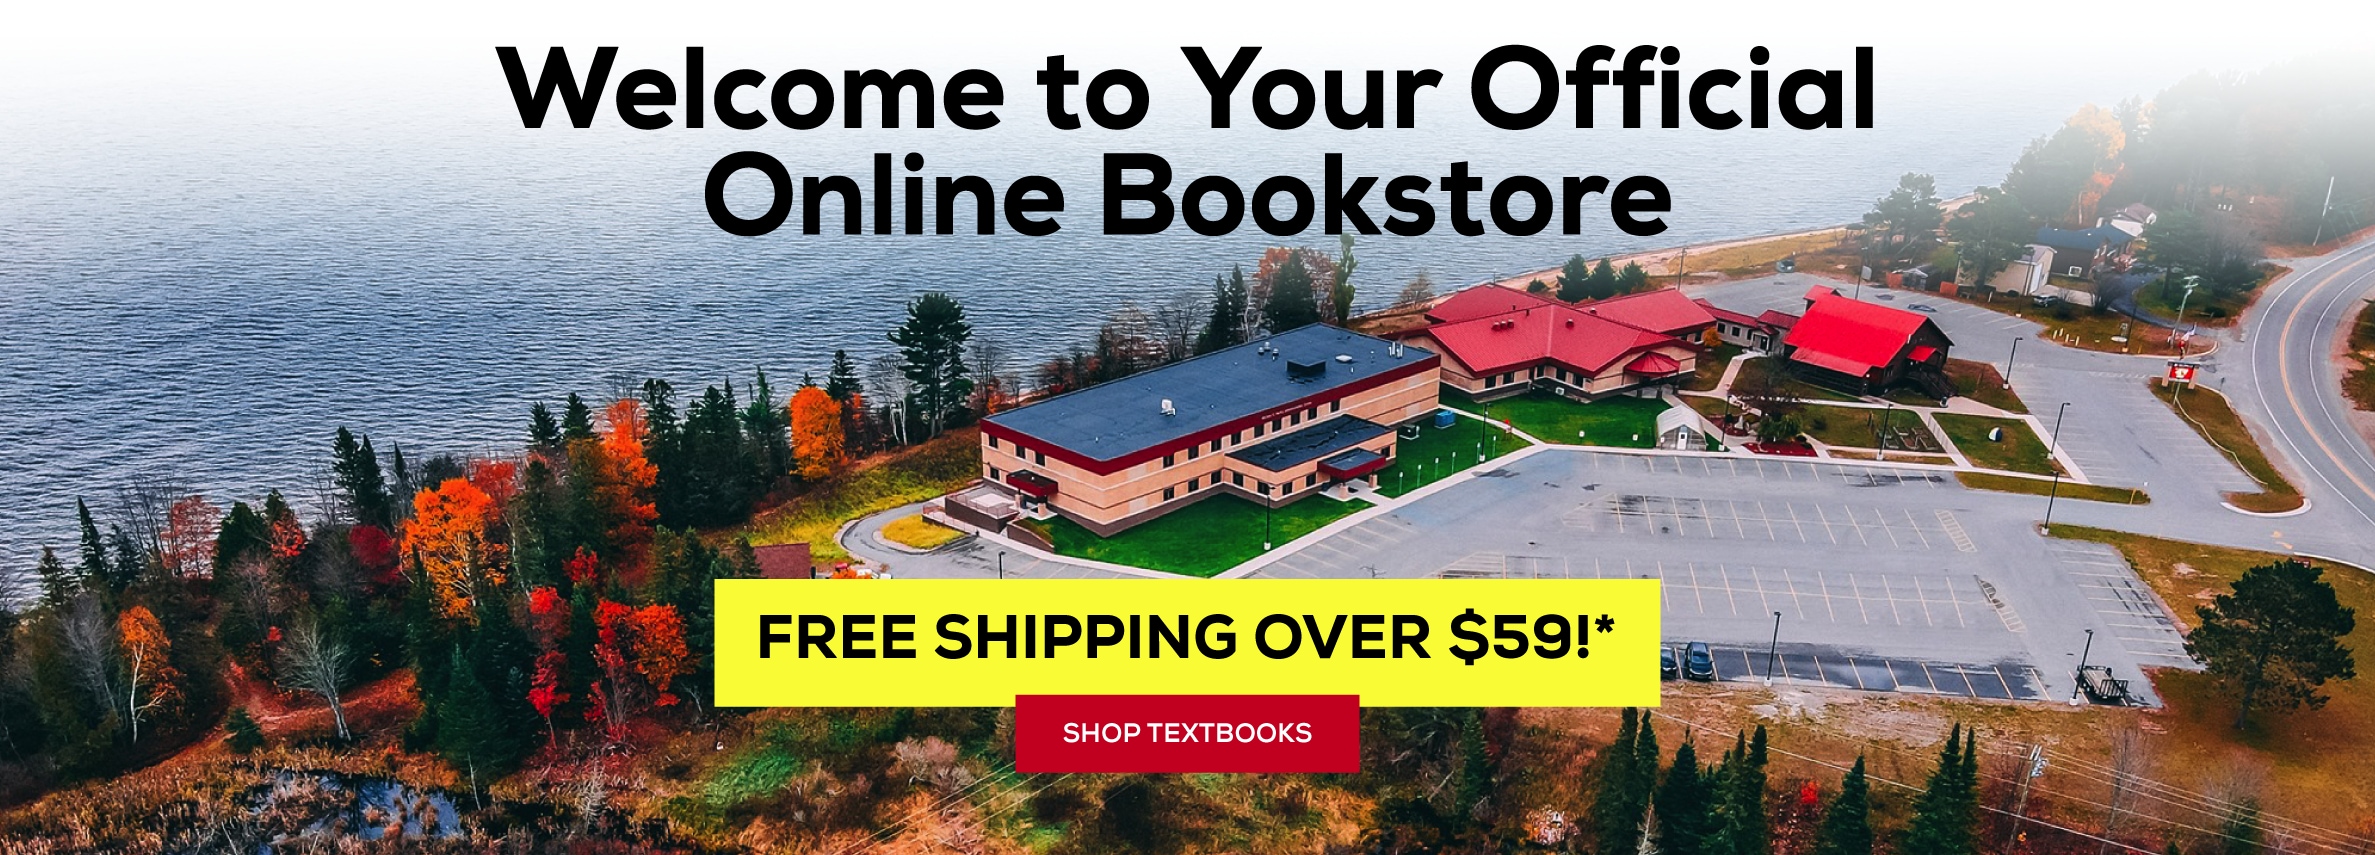 Welcome to Your Official Online Bookstore FREE SHIPPING OVER $59!* SHOP TEXTBOOKS